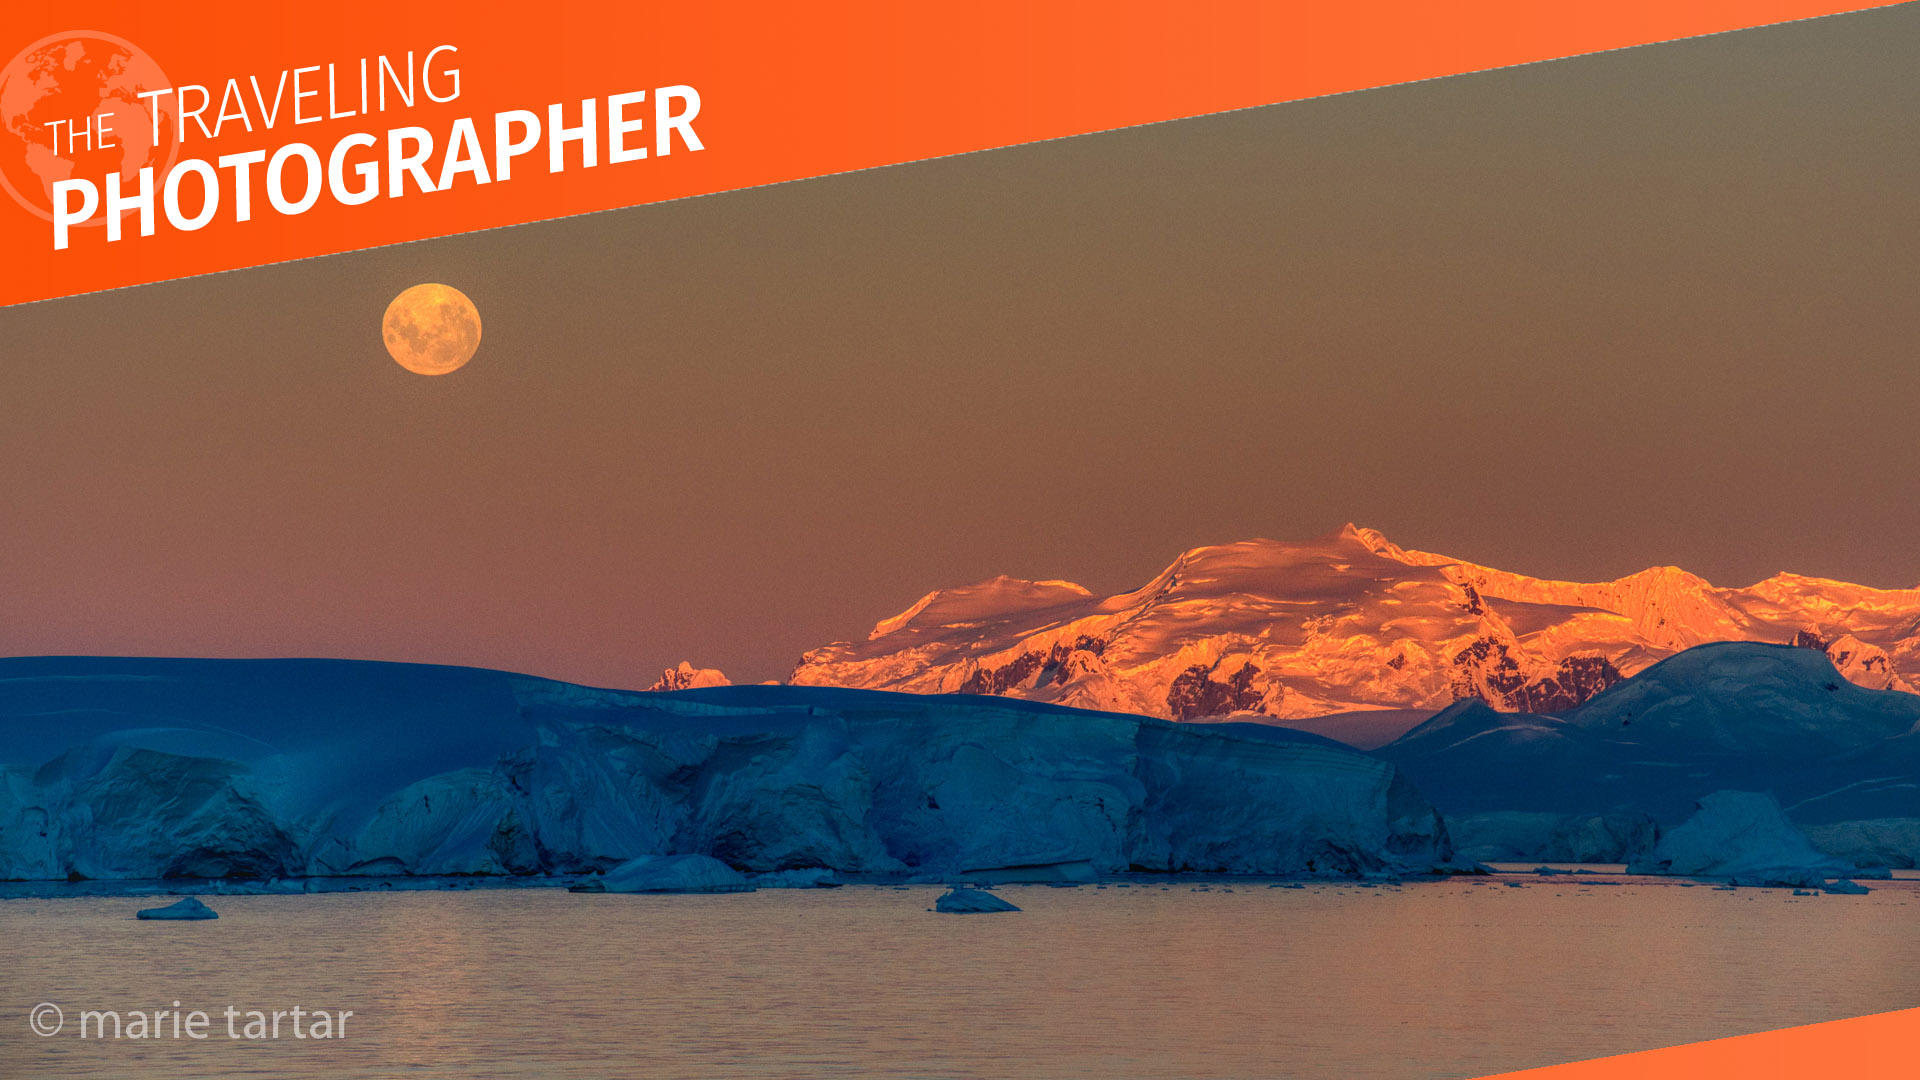 A land of icy landscapes and otherworldly light: Antarctica.